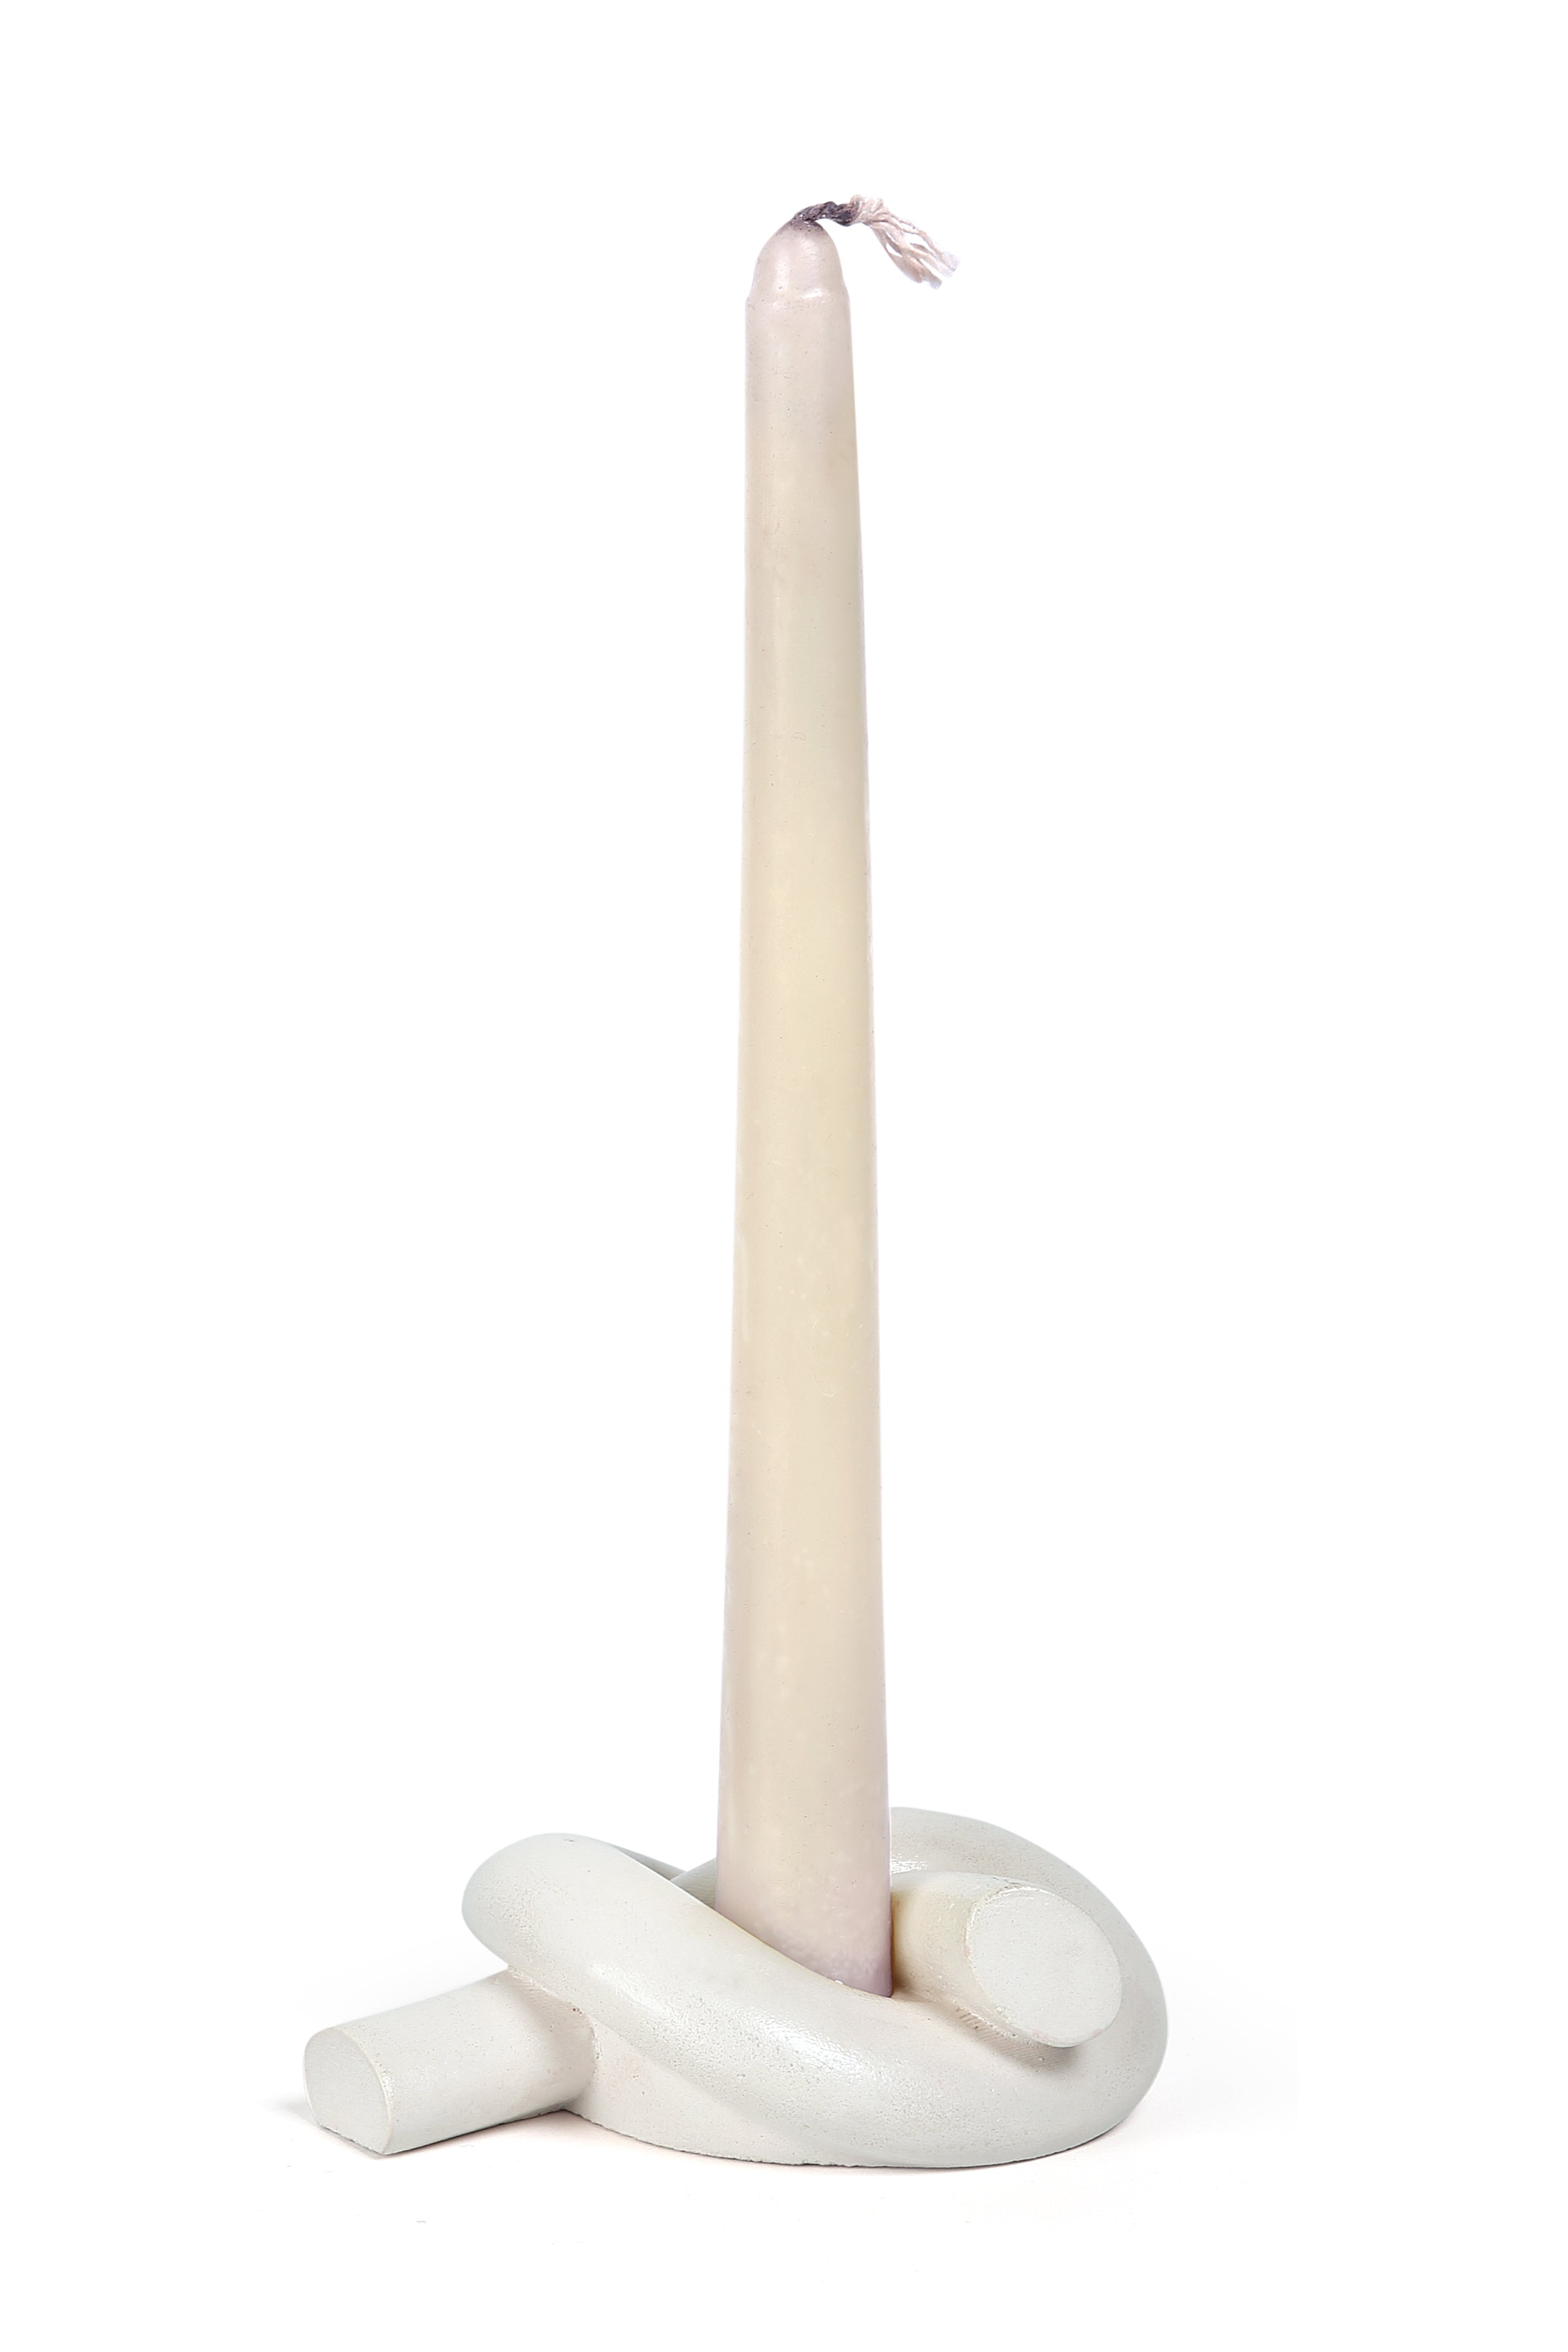 Aesthetic Style Knot Concrete Candle Holder - Ivory , 1x3.2x4.5 Inch (Set of 2)